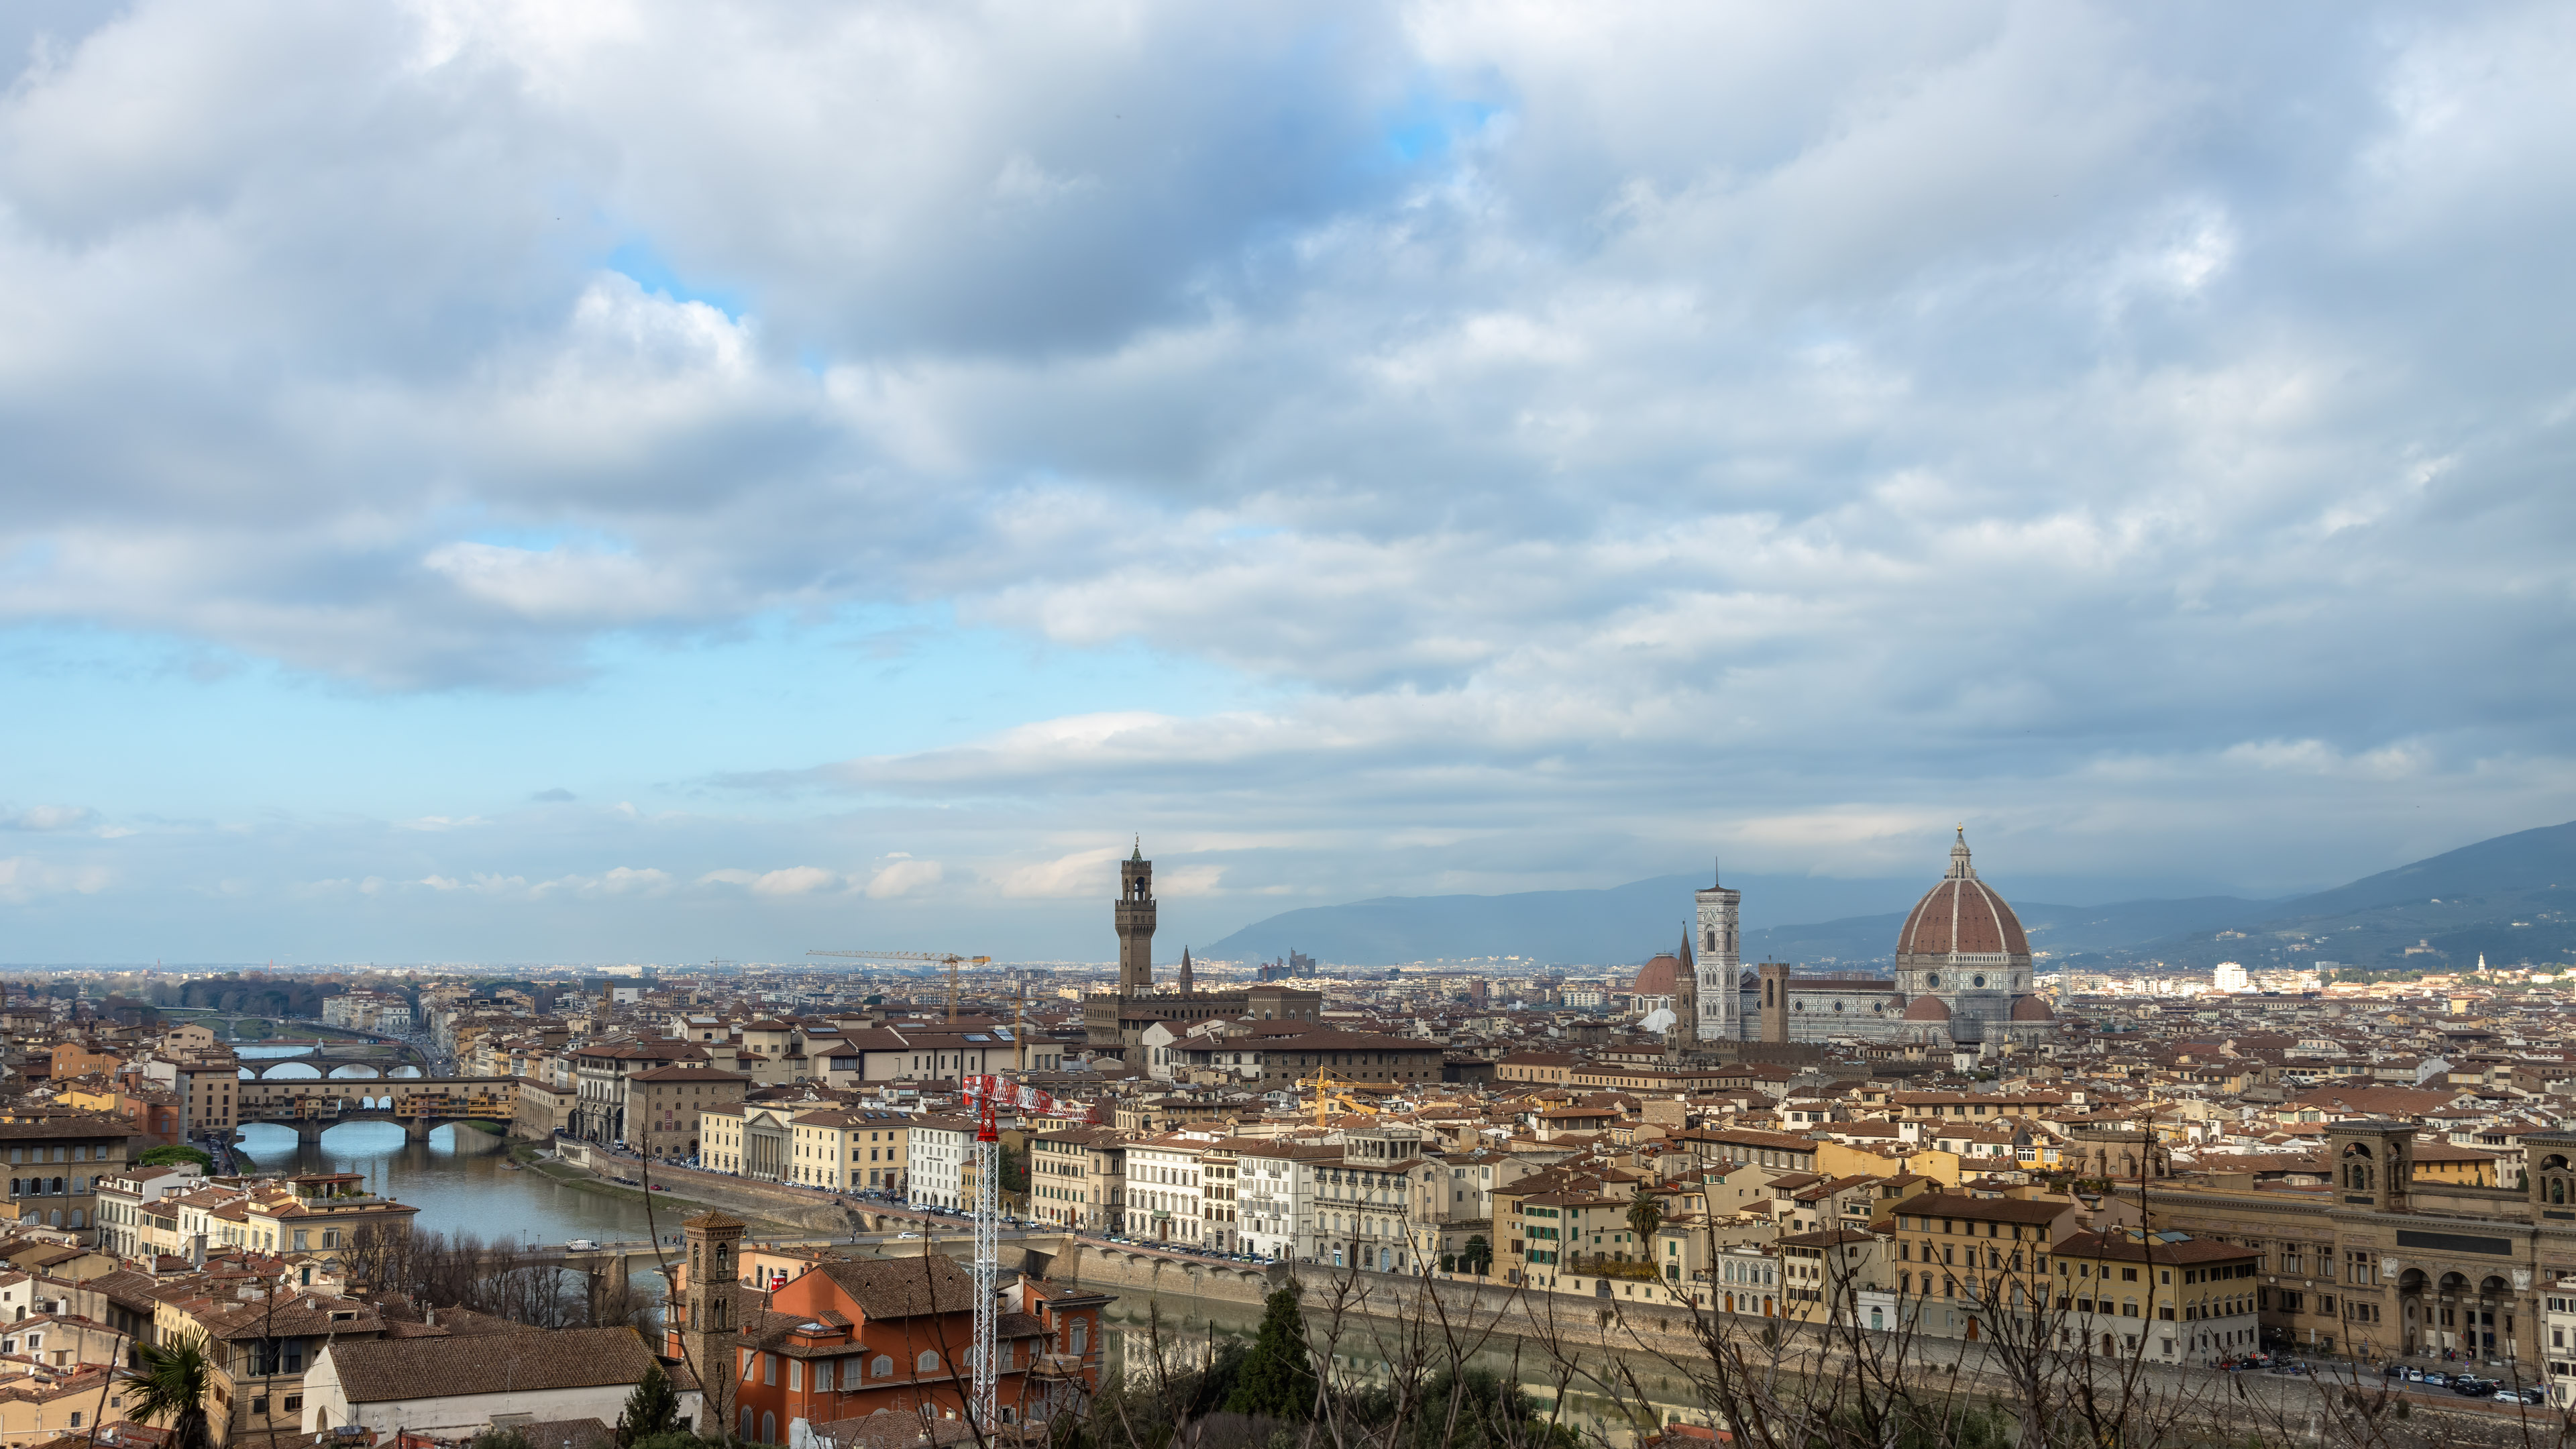 Experience the beauty of Florence with our cityscape wallpaper. Featuring stunning views of the city's famous landmarks and bridges, this wallpaper is the perfect way to bring Florence into your home.